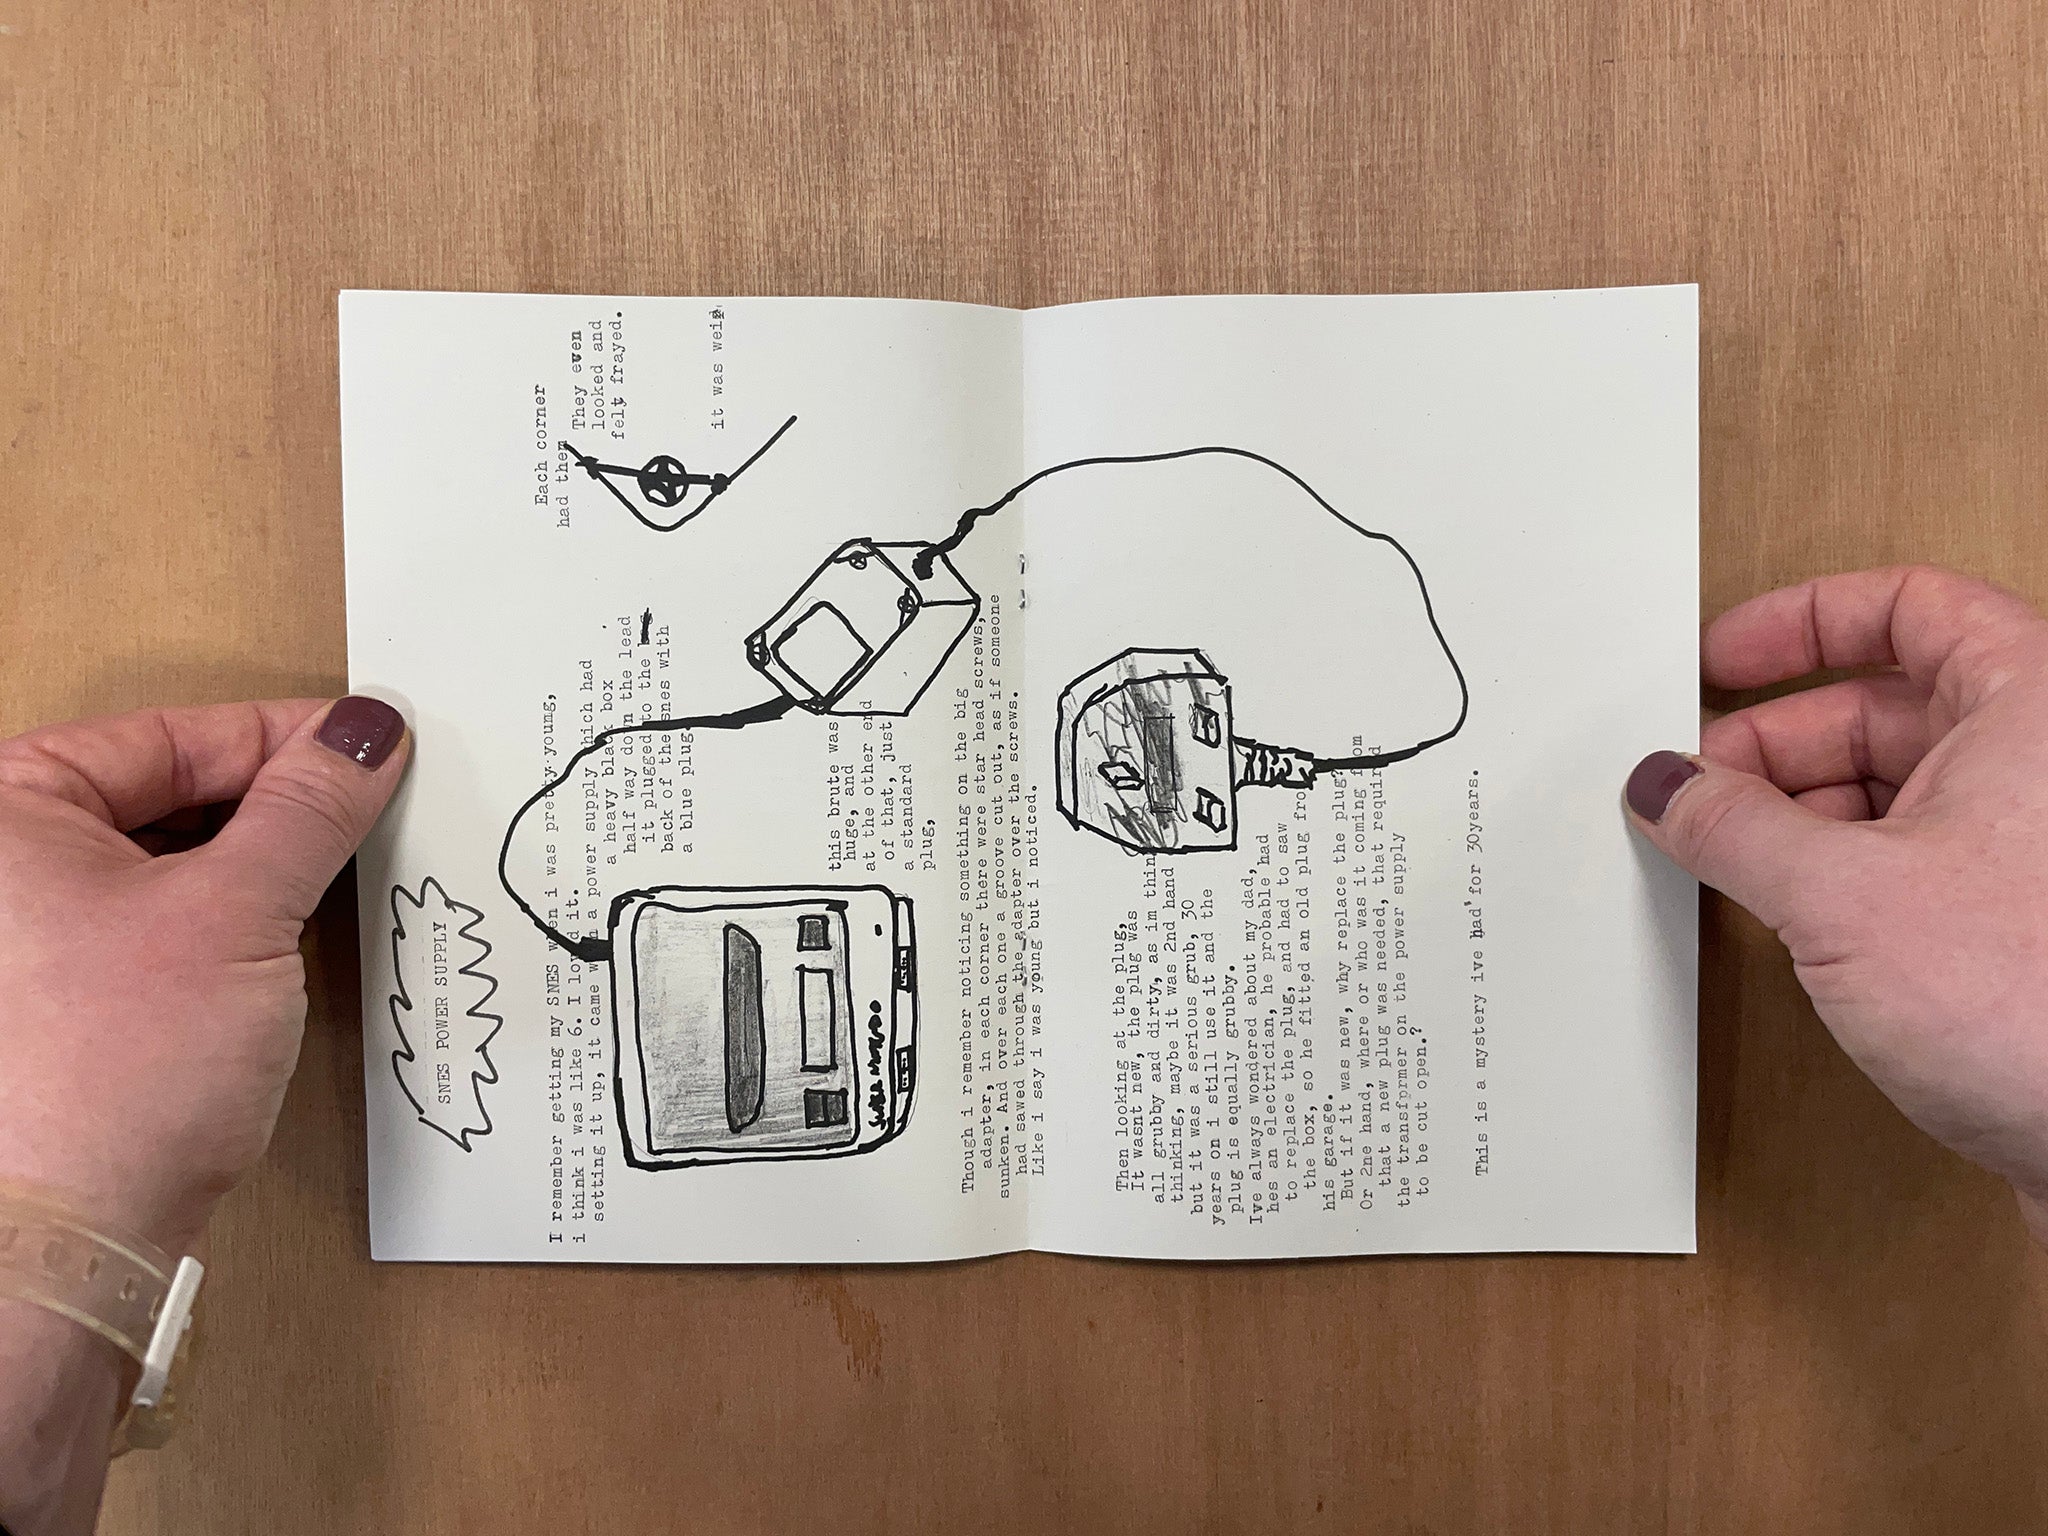 THIS TYPEWRITER USES AUTOSAVE ISSUE 2 - SCIENCE TEETH by Matt Clay